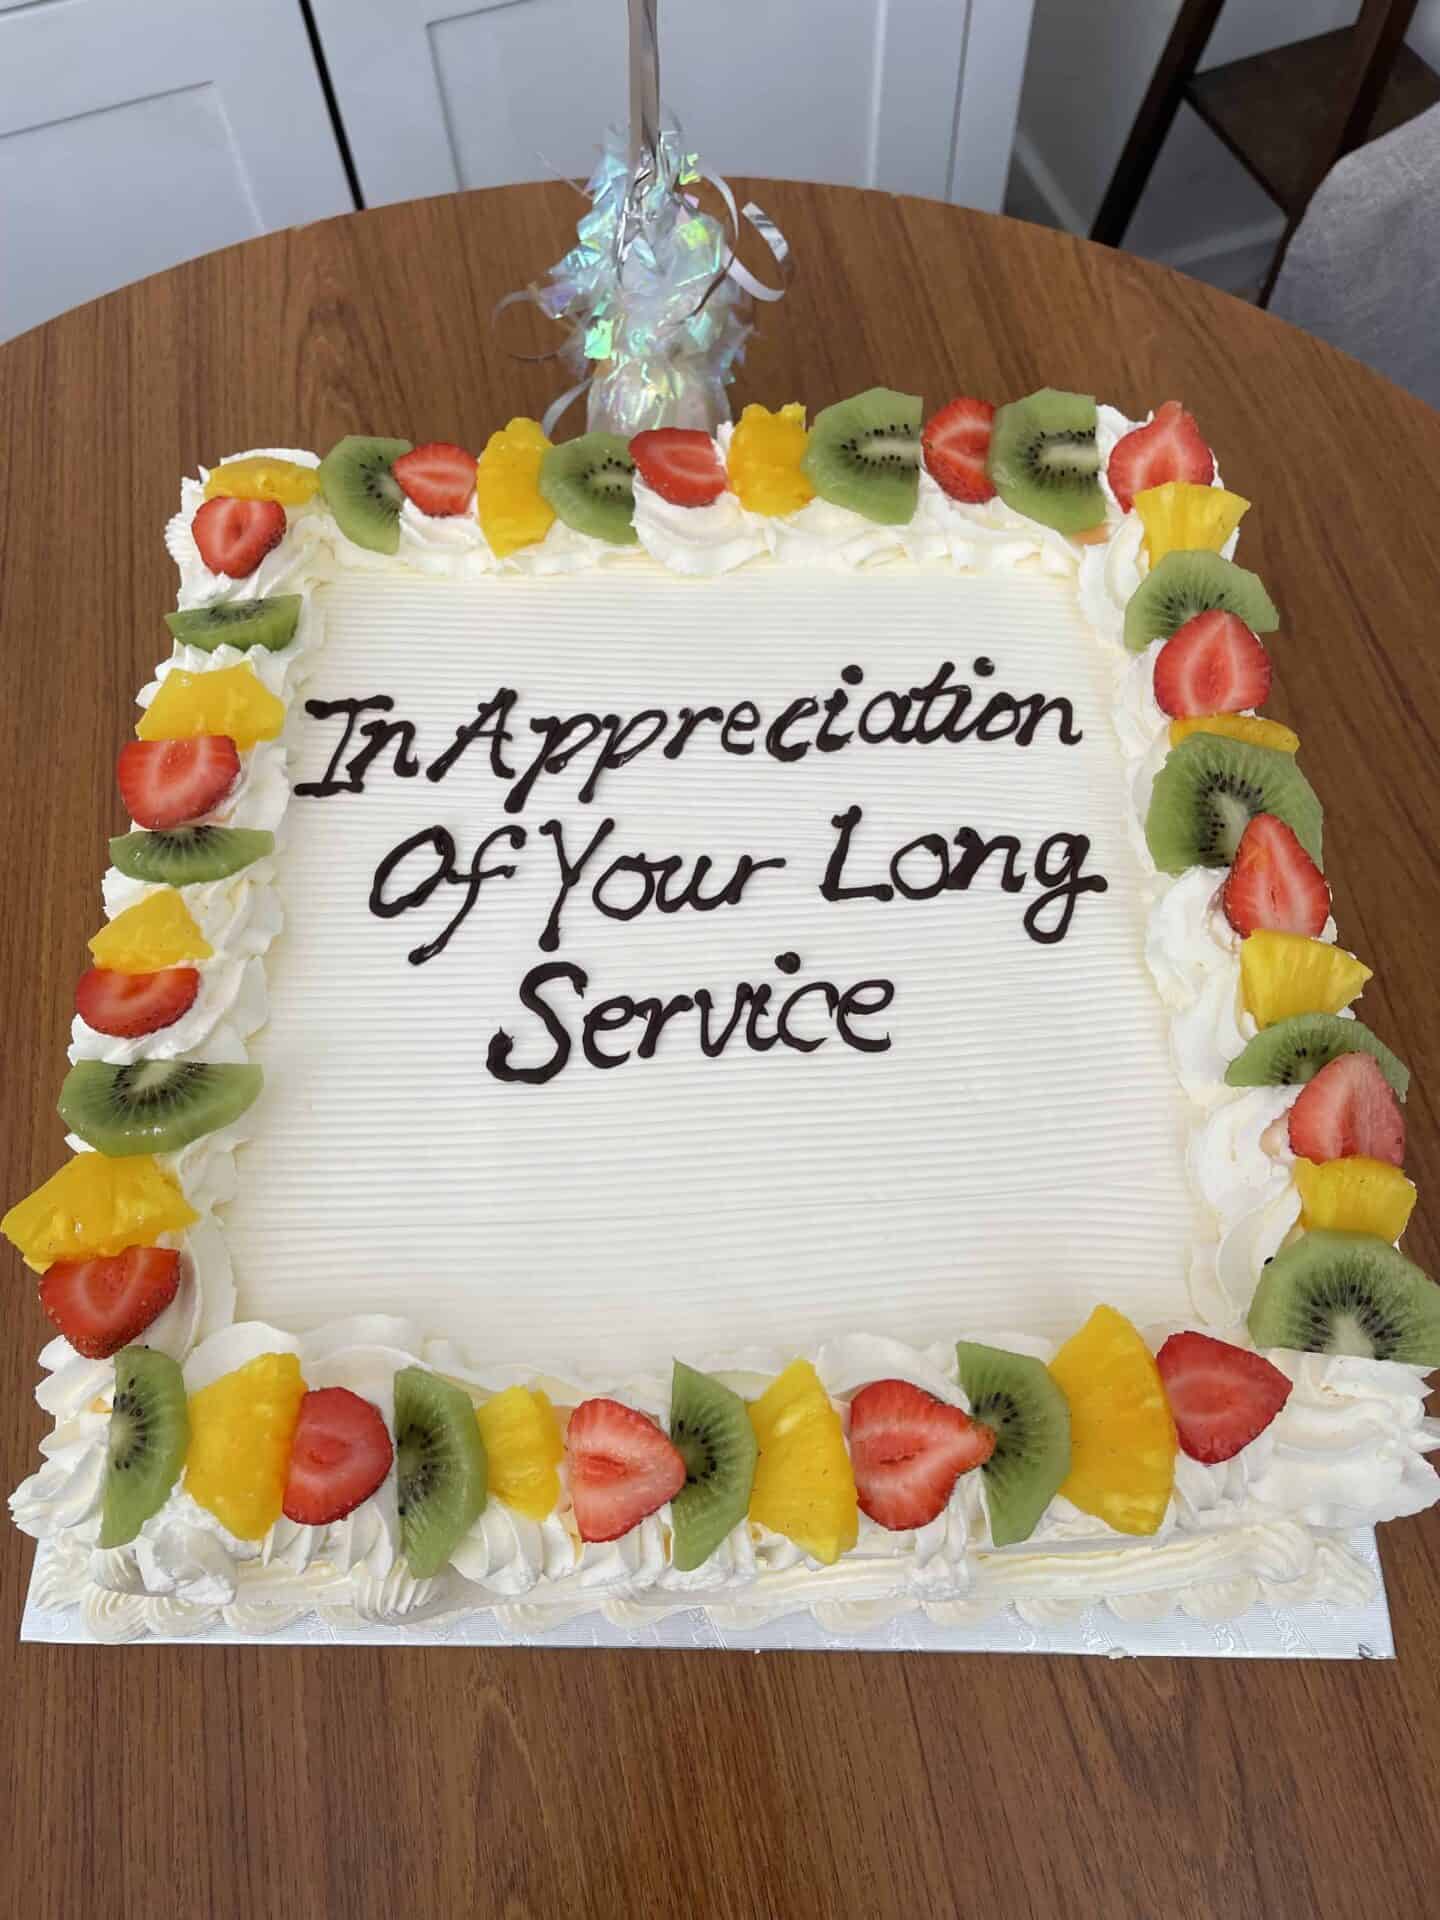 A large rectangular celebration cake with the message "in appreciation of your long service" written in chocolate frosting, decorated with whipped cream dollops and fresh fruit slices including strawberries, kiwis, and oranges.